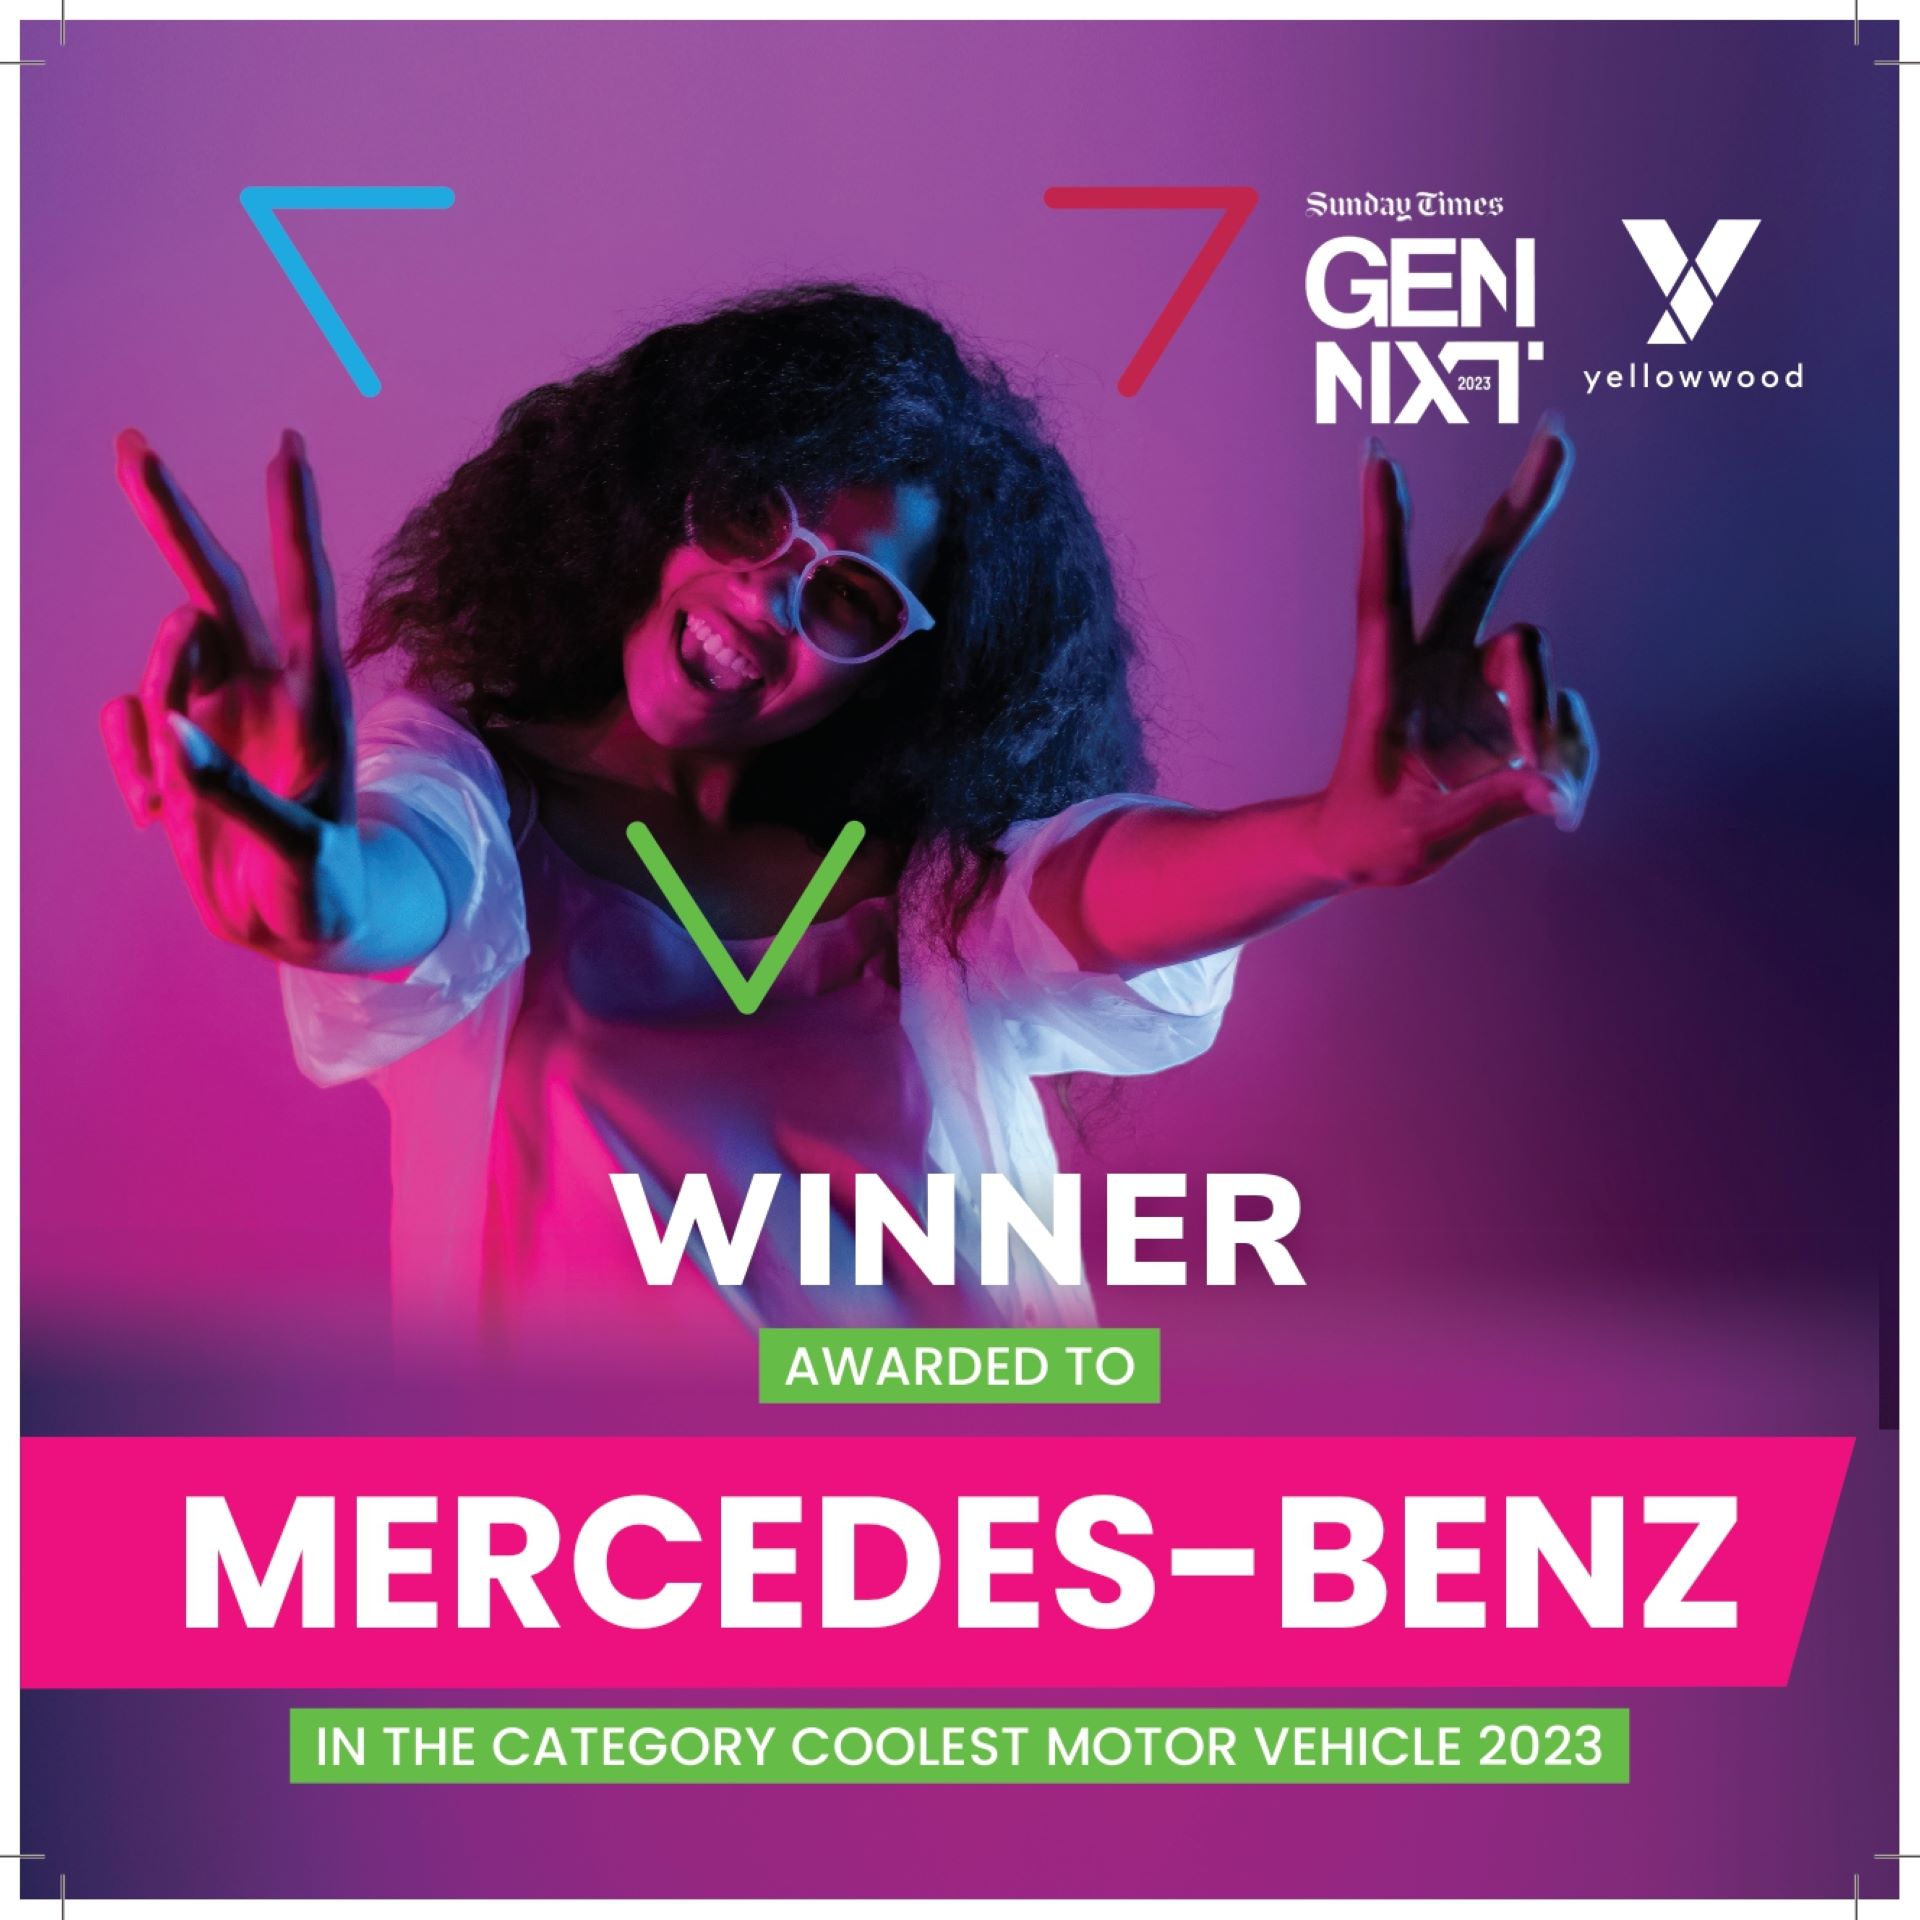 Mercedes-Benz South Africa awarded coolest motor vehicle brand in South Africa by Sunday Times GenNext